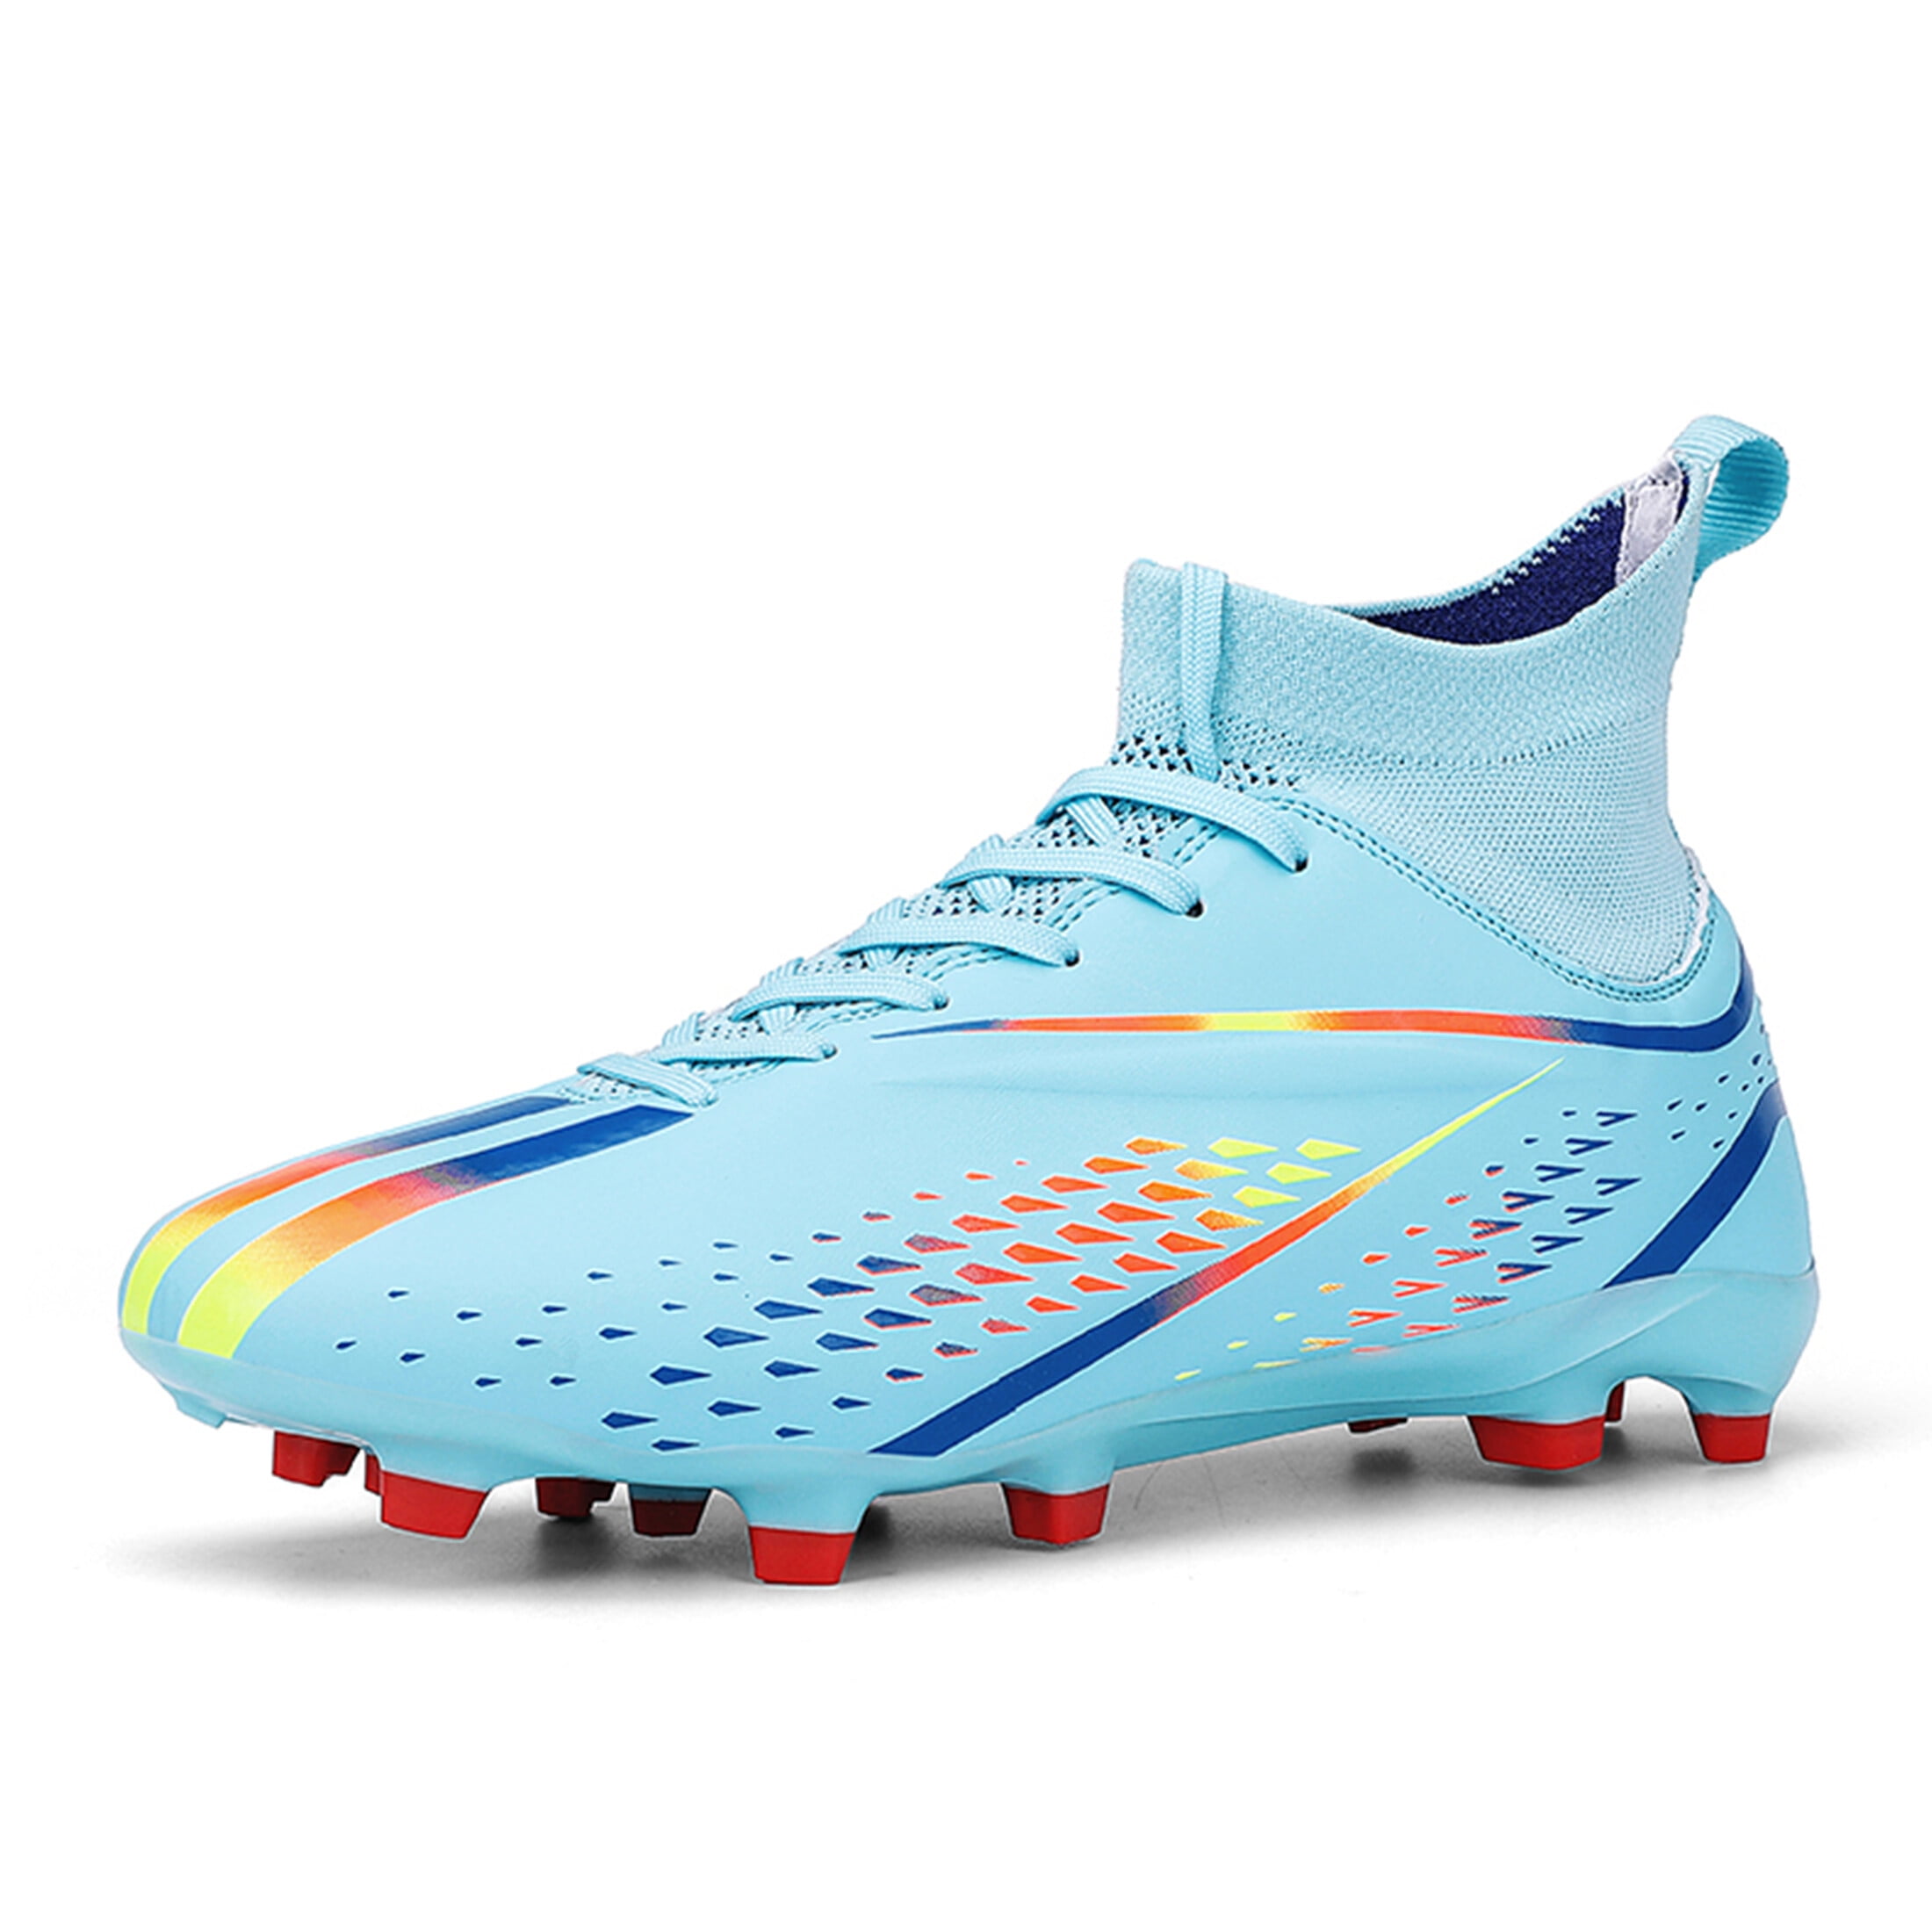 The best men's football boots you can buy in 2023 | Goal.com